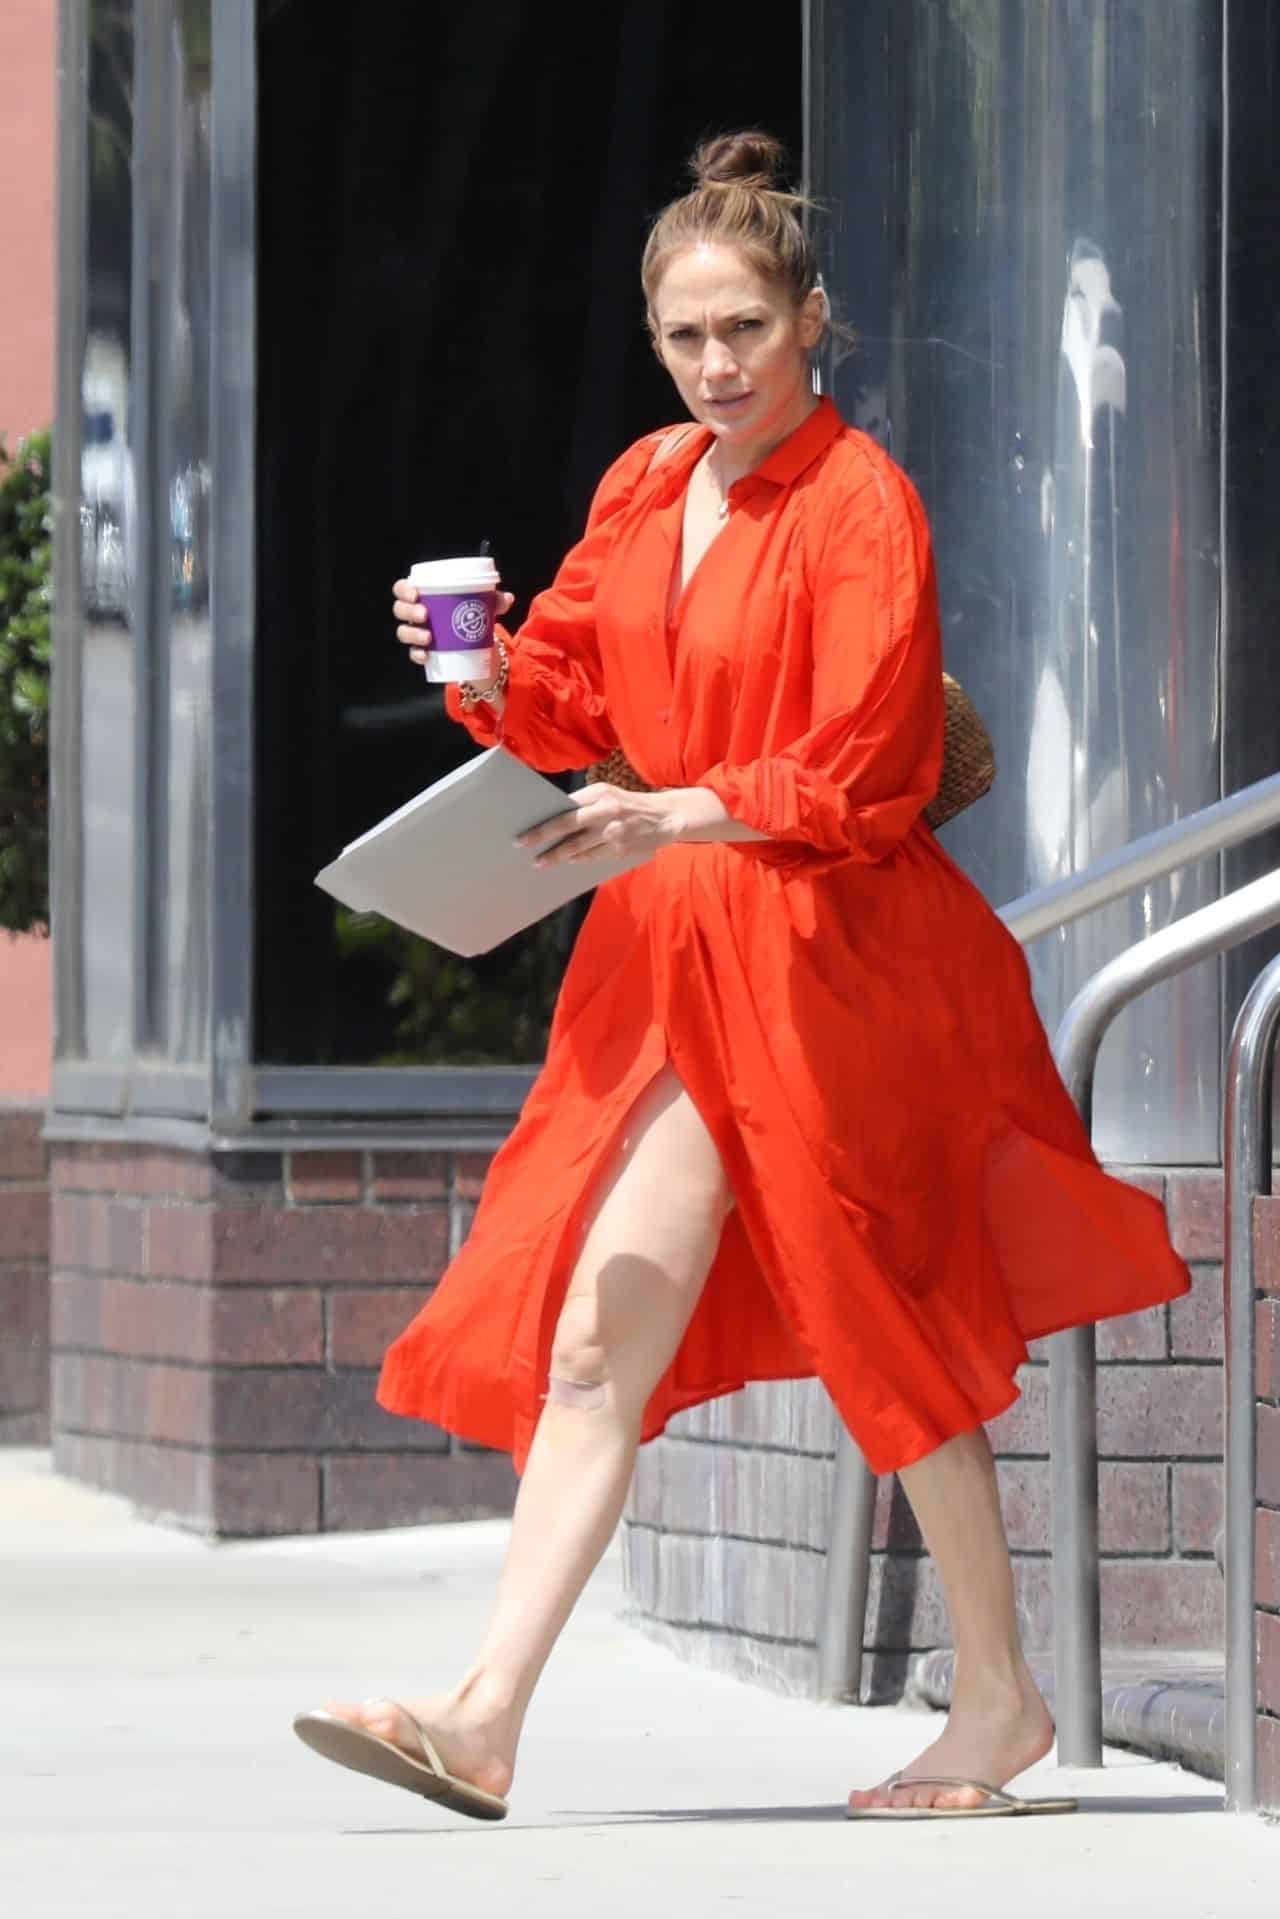 Jennifer Lopez Attended a Business Meeting in a Red Dress and Flip-flops